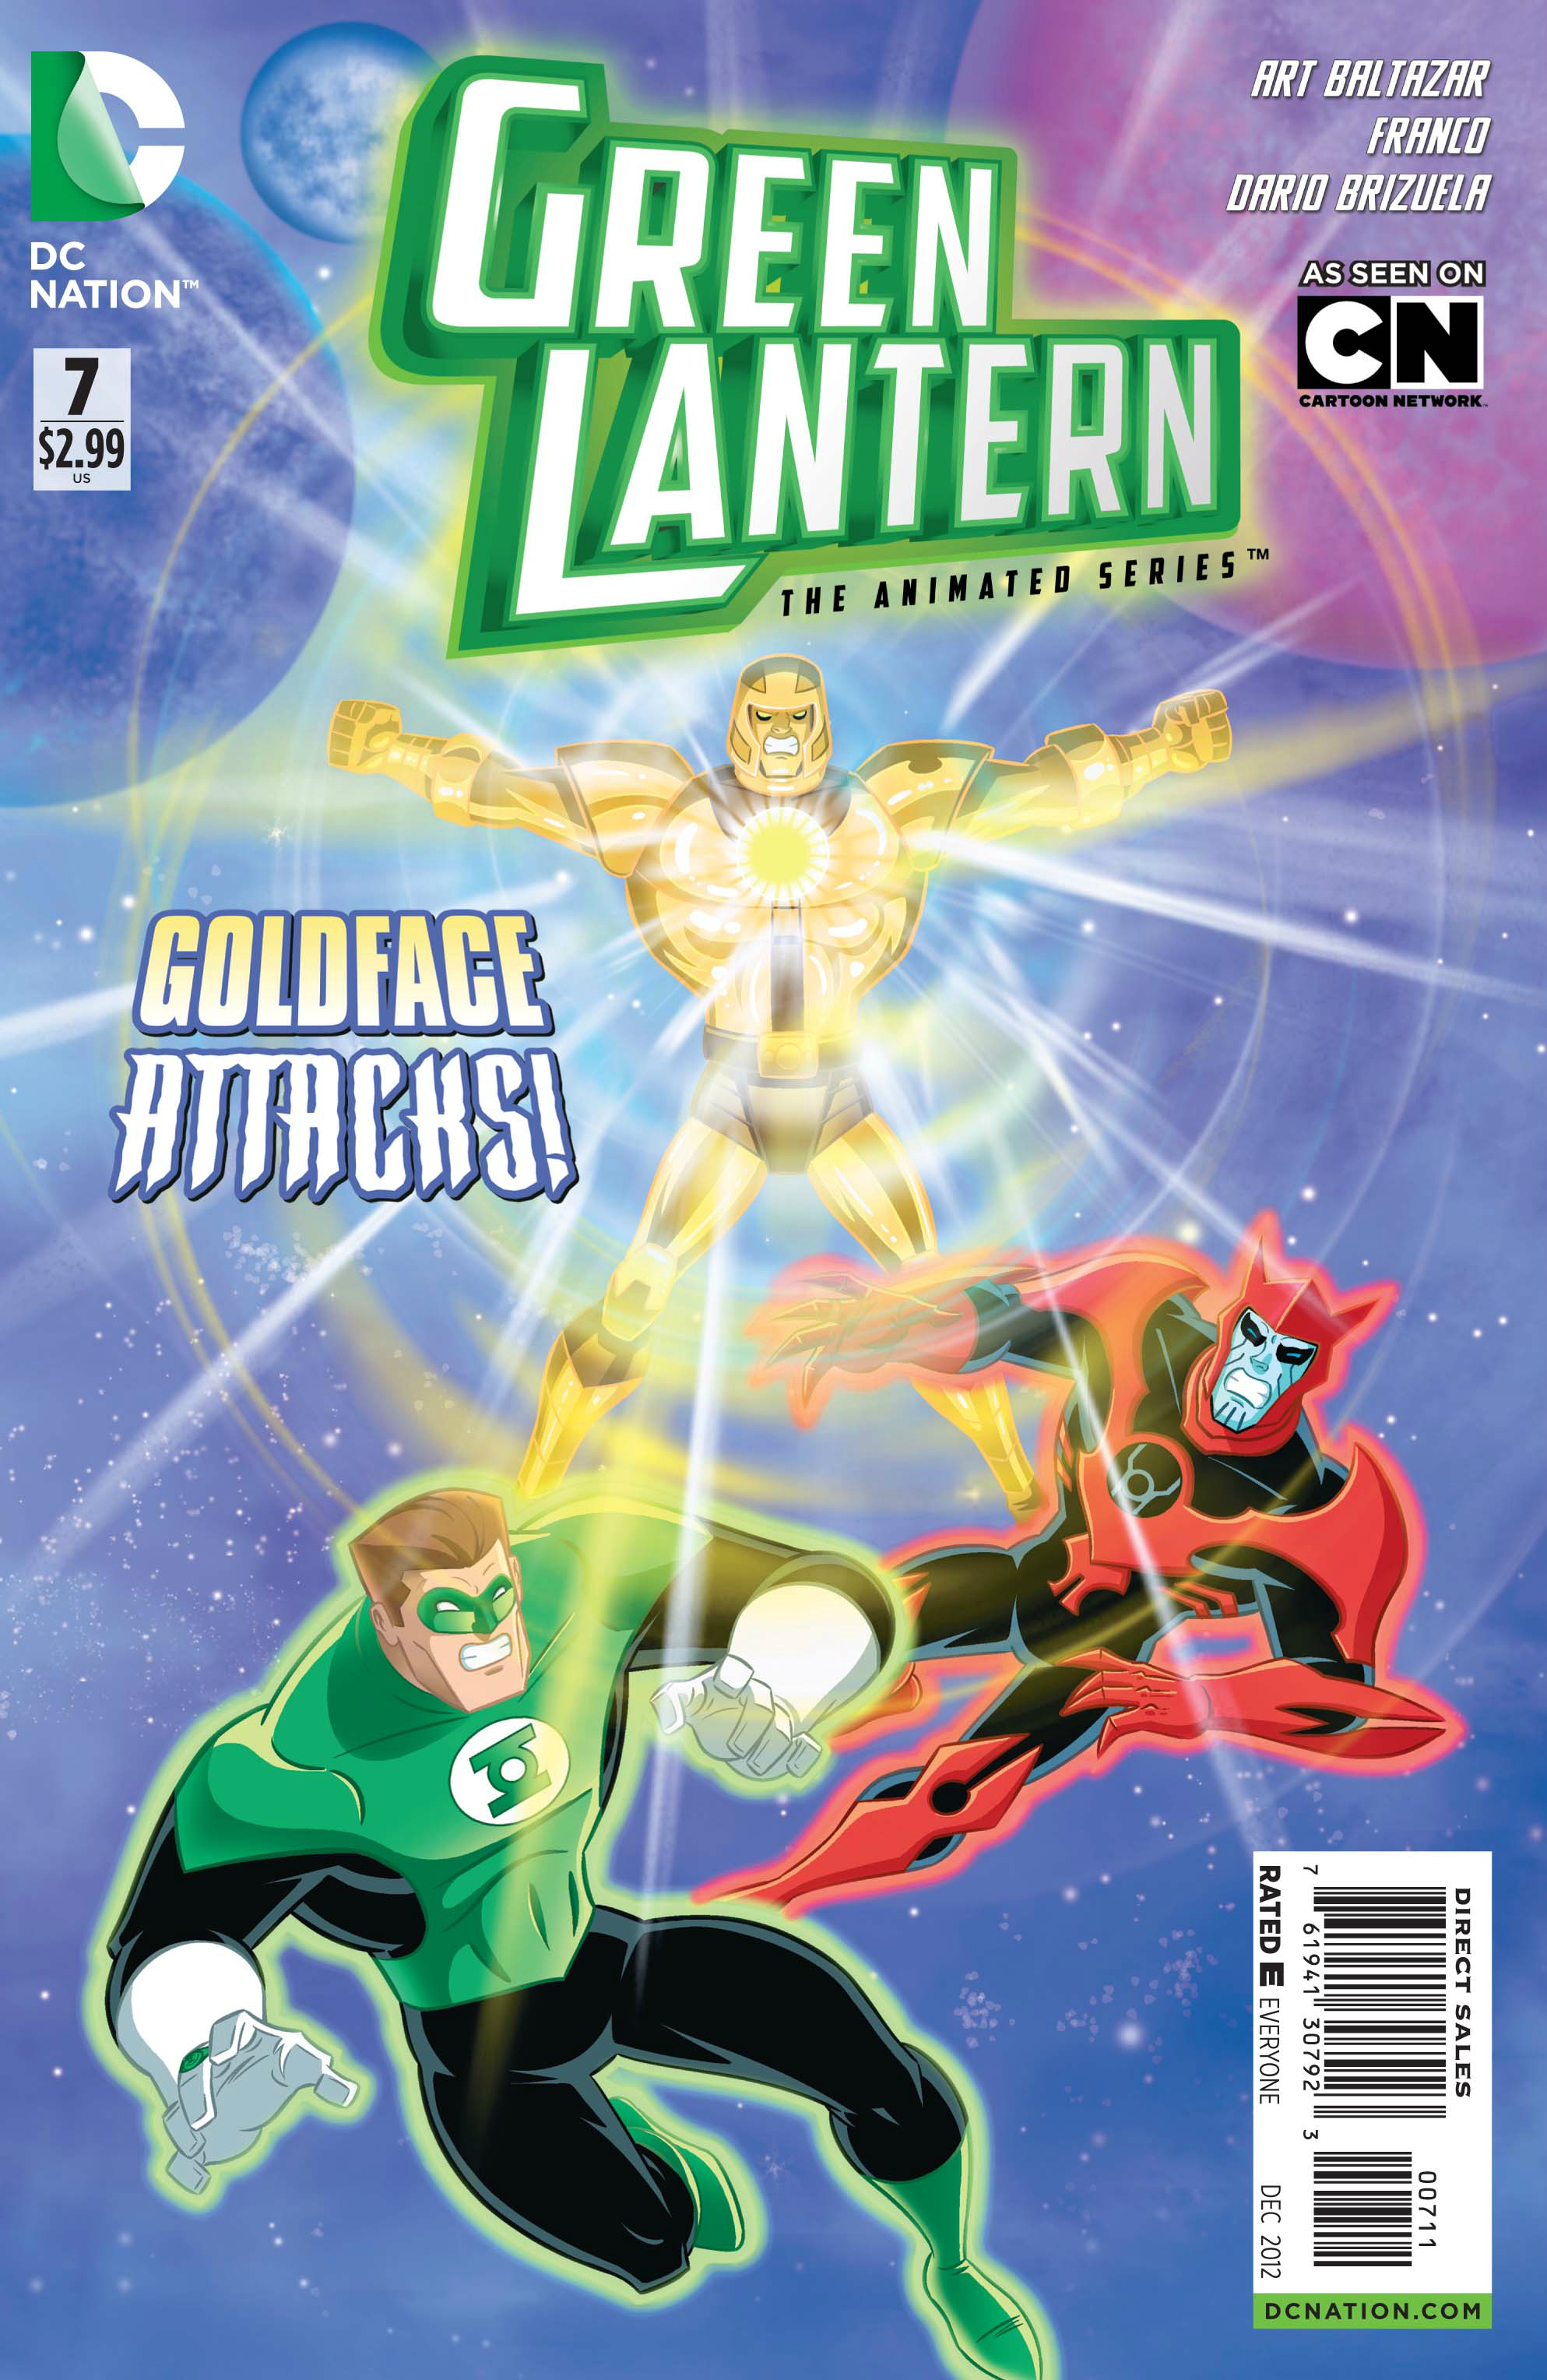 Goldface (issue) | Green Lantern The Animated Series Wiki | Fandom